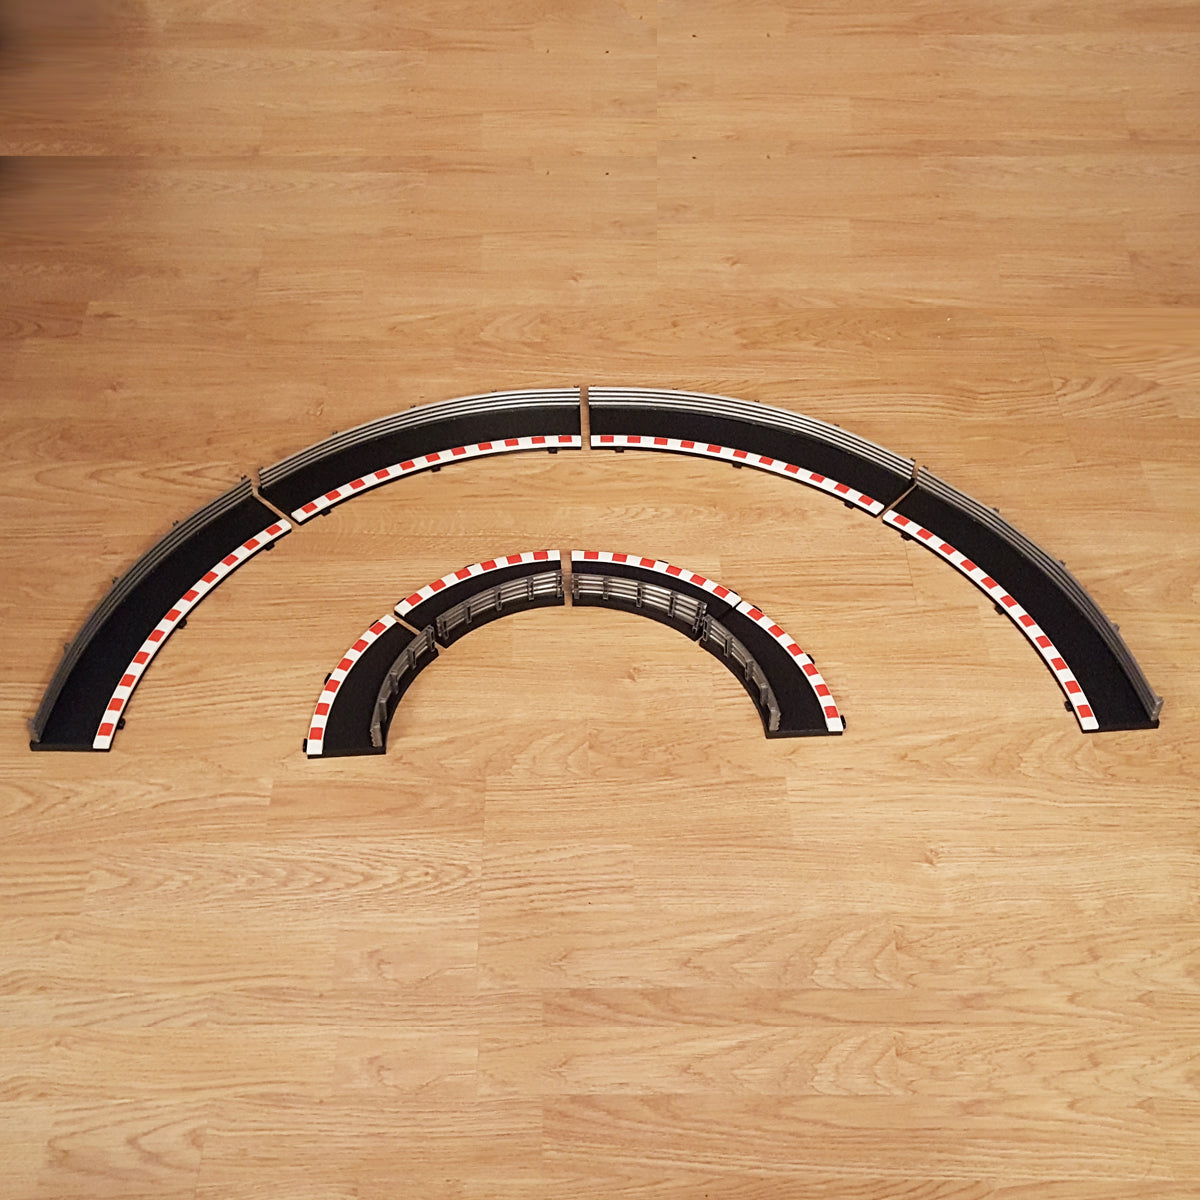 Scalextric 1:32 Sport Rad2 Black Borders & Barriers - 4 Outer, 4 Inner #R